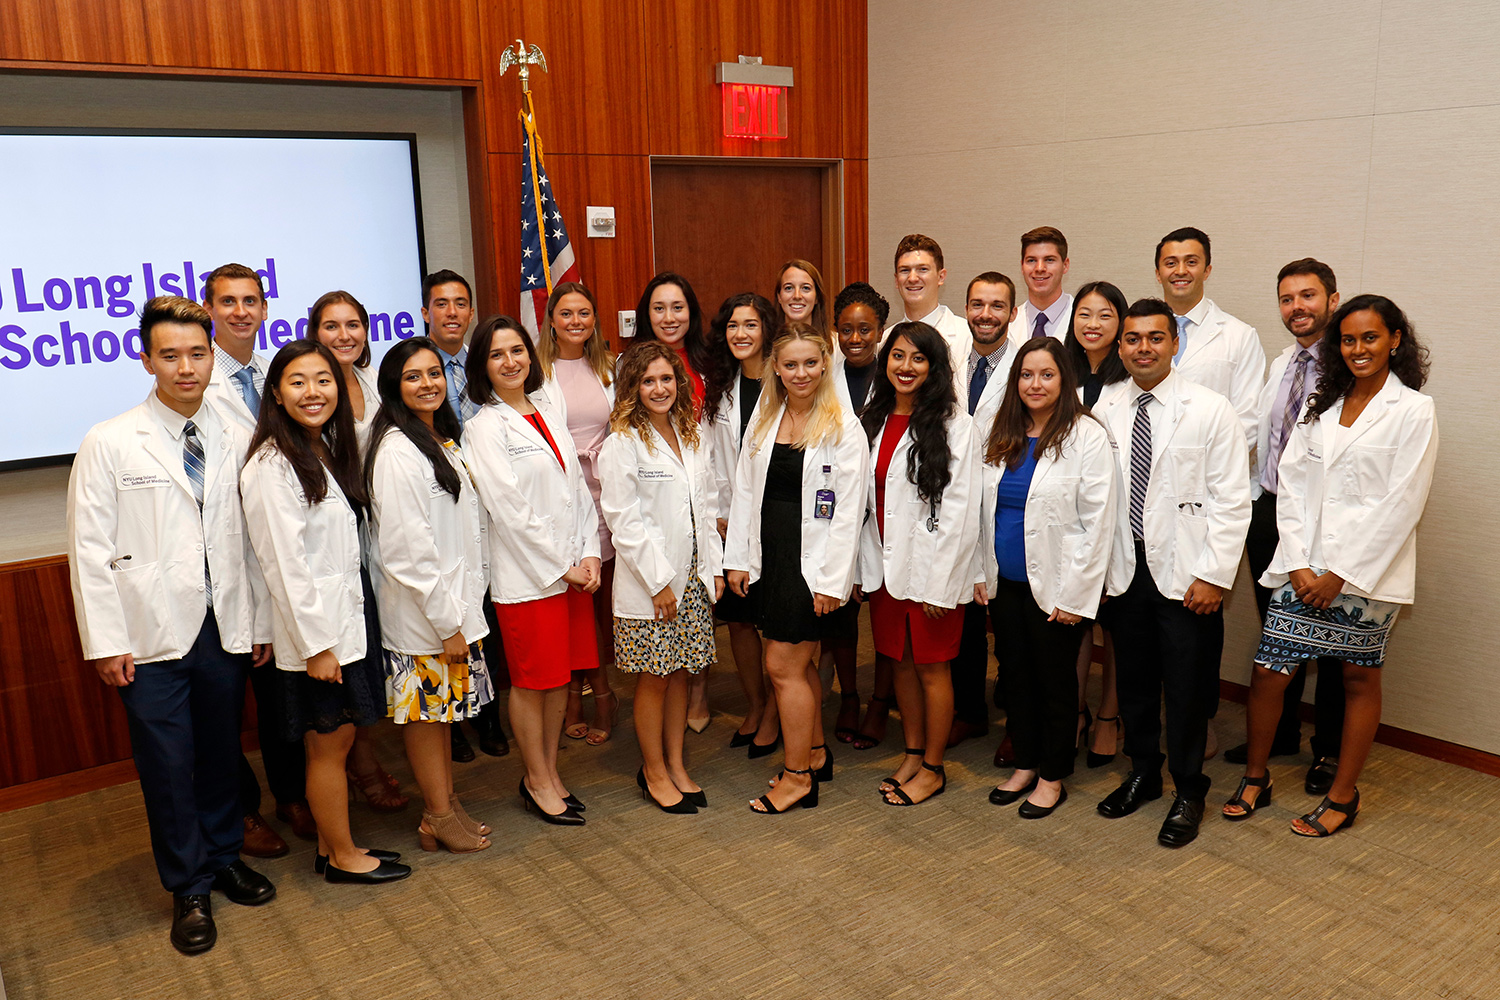 White Coat Ceremony First Class at NYU Long Island School of